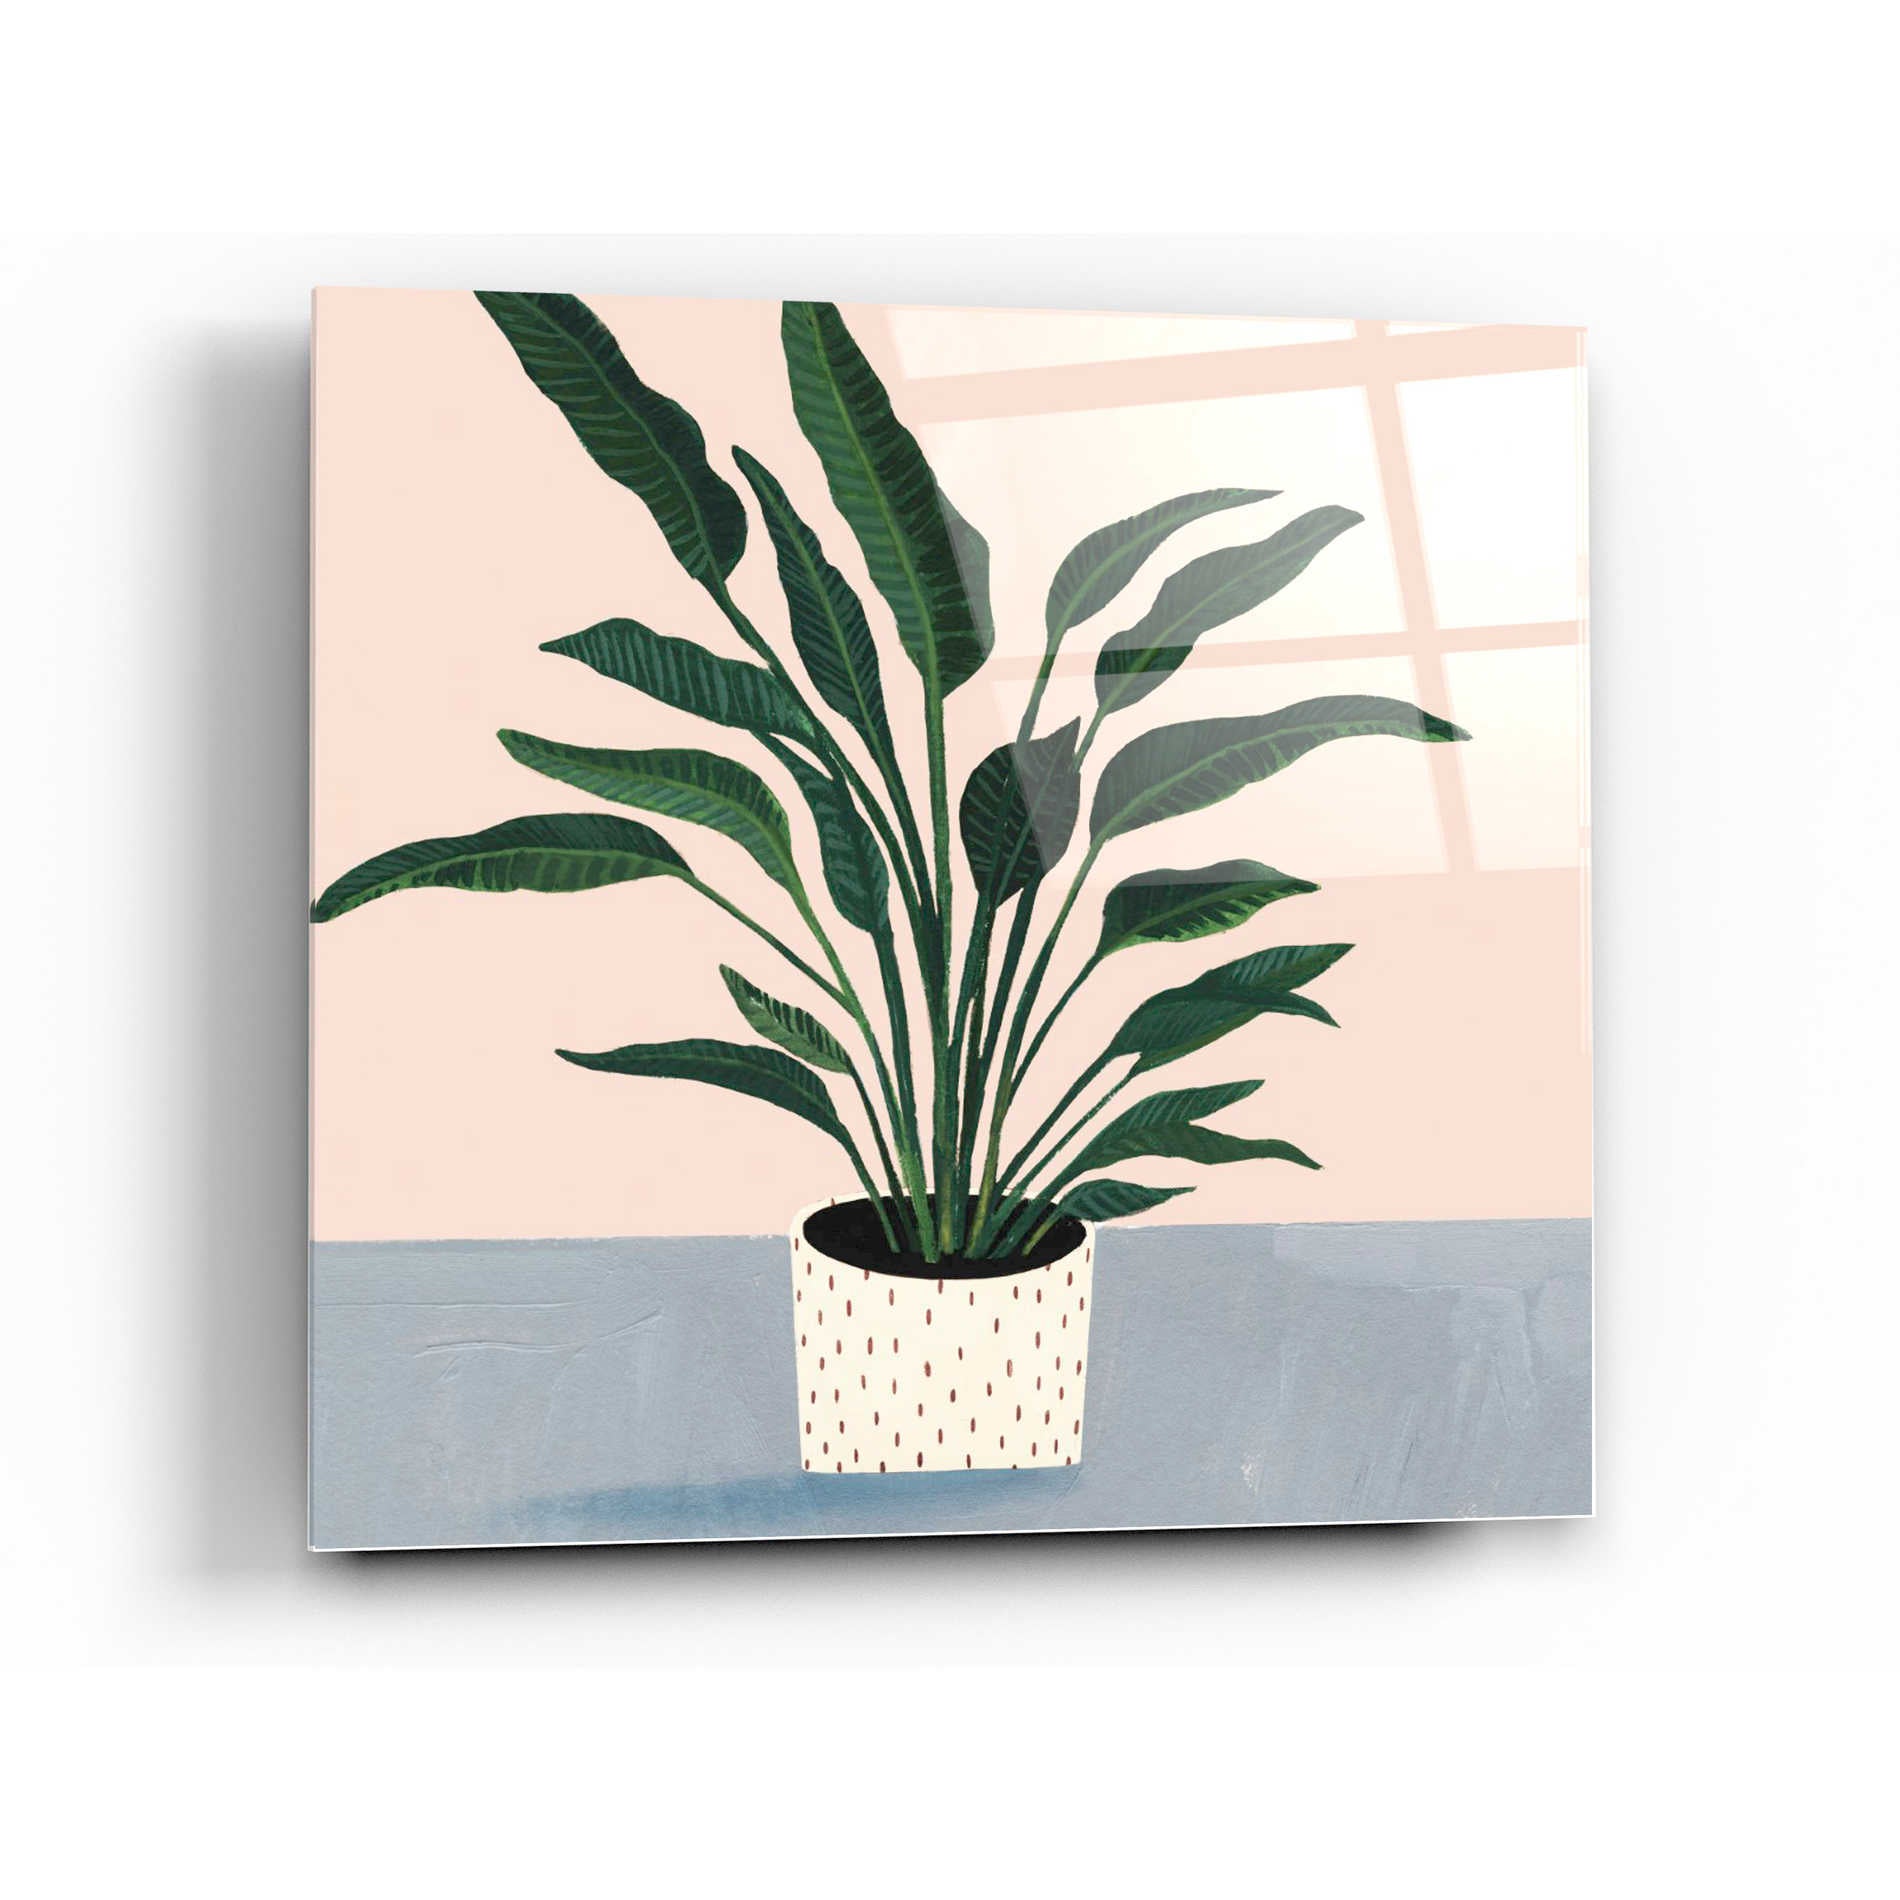 Epic Art 'Houseplant IV' by Victoria Borges Acrylic Glass Wall Art,36x36